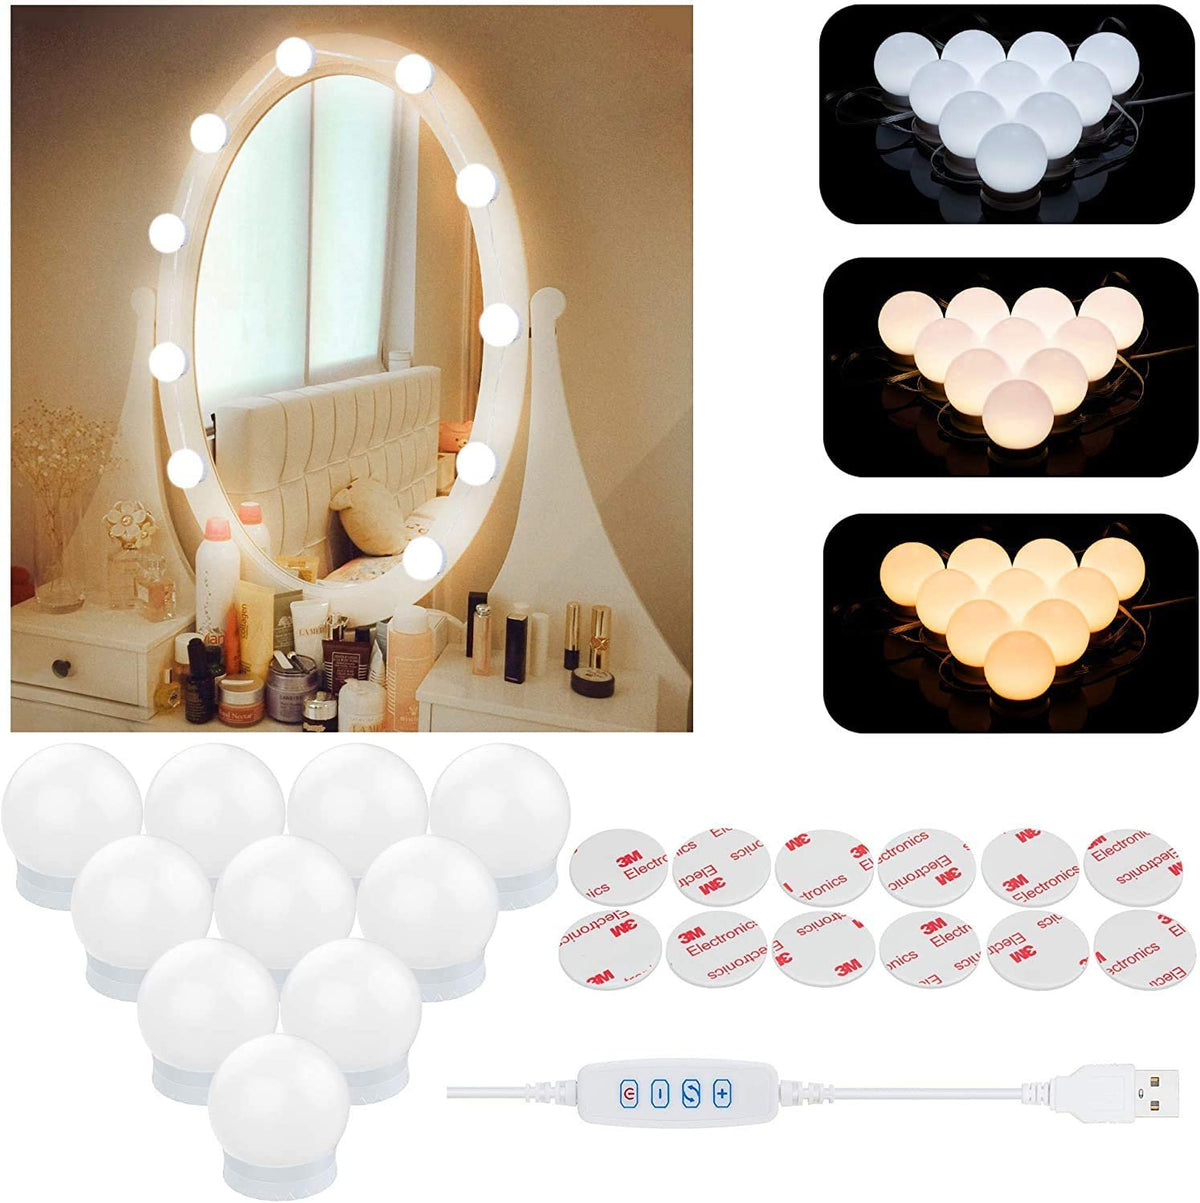 Vanity Lights for DIY Hollywood Mirror, LED Strip Lights Kit with Touch Sensor Dimmer Switch and Power Adaptor, 10 Bulbs